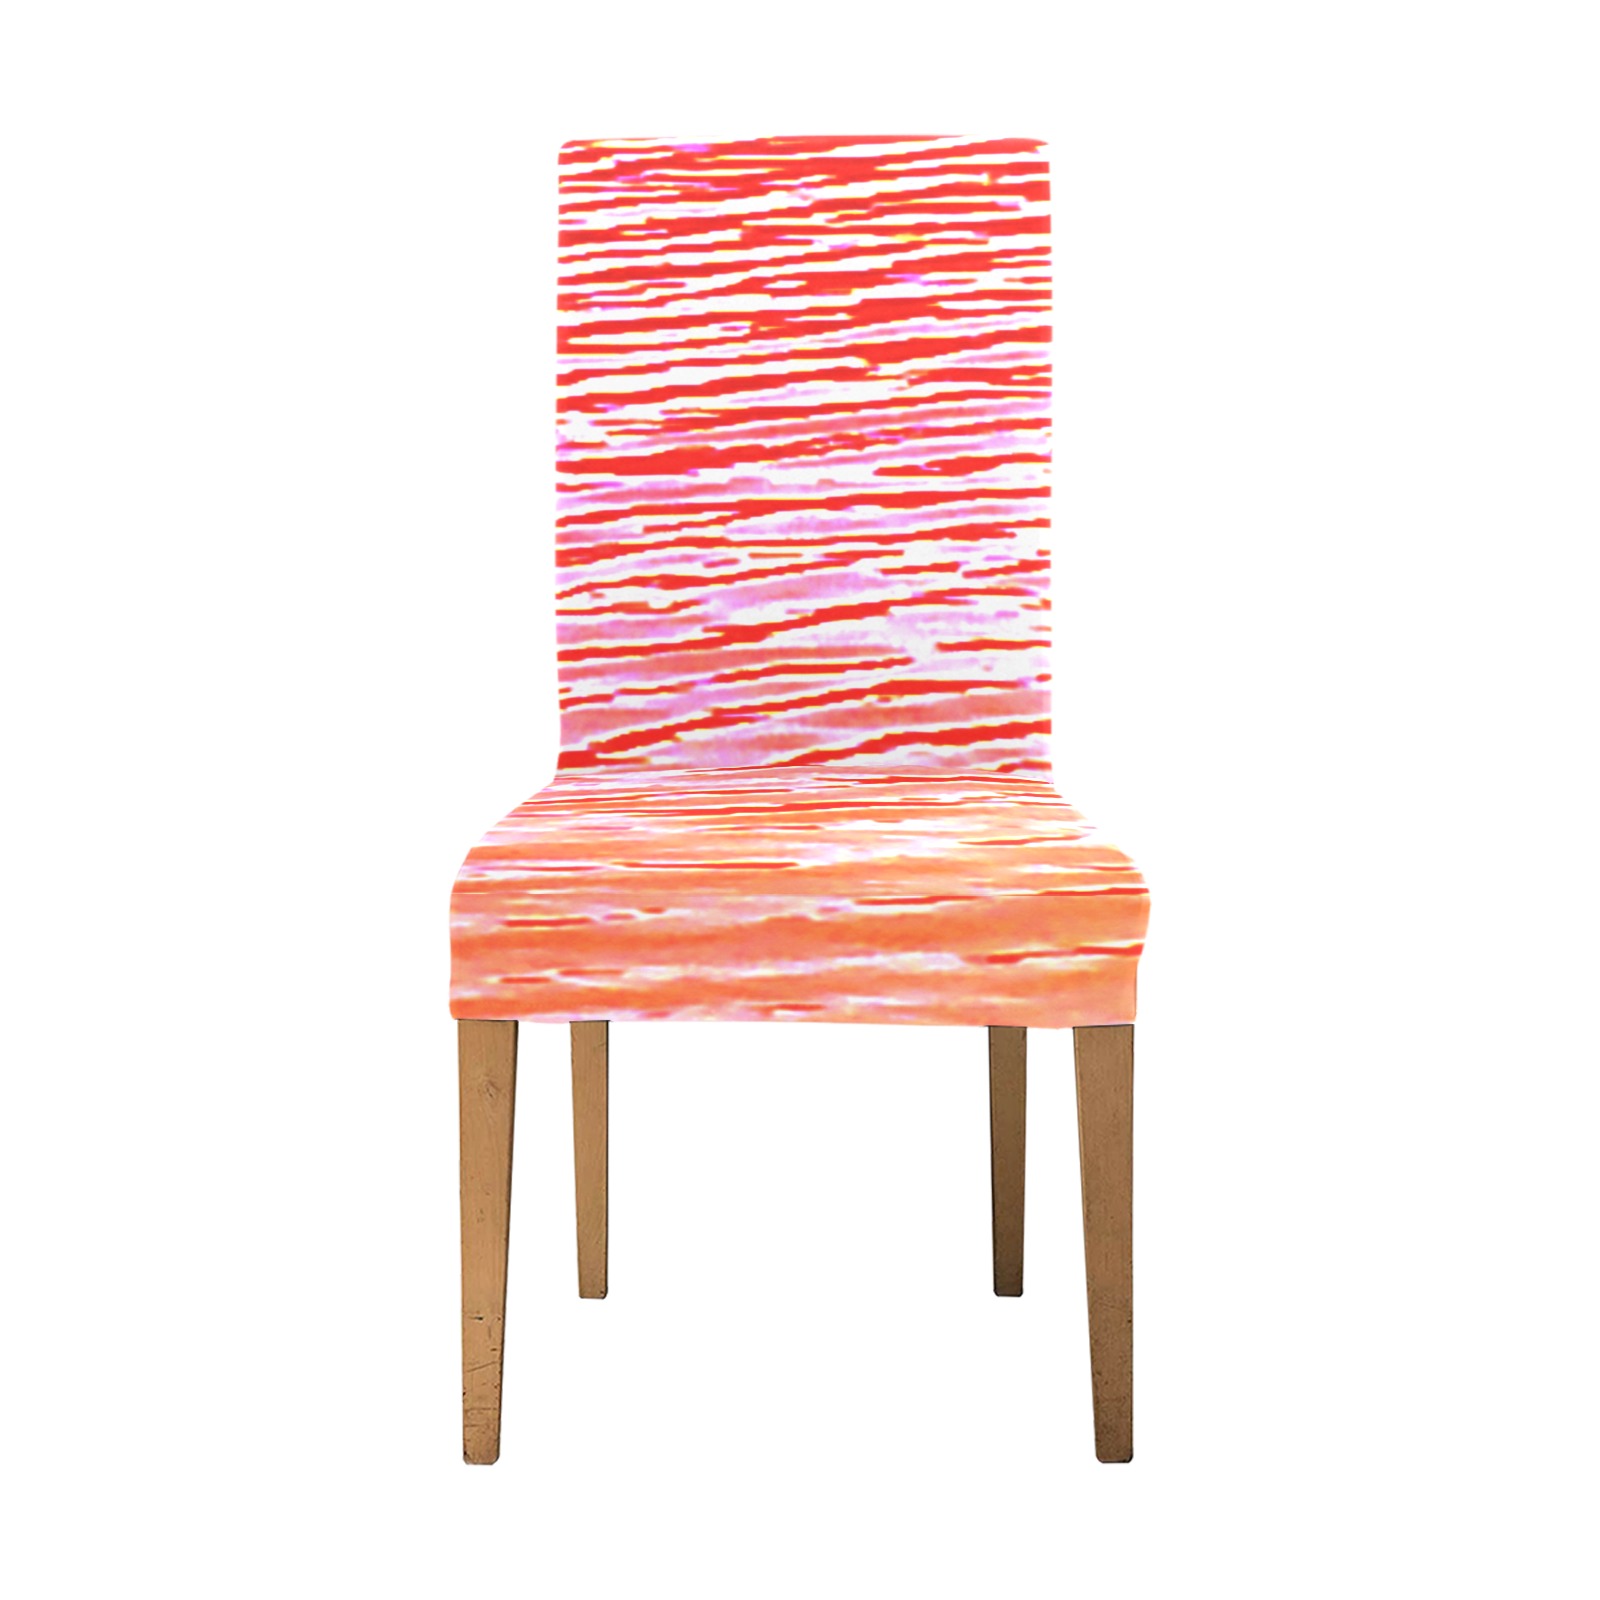 Orange and red water Removable Dining Chair Cover